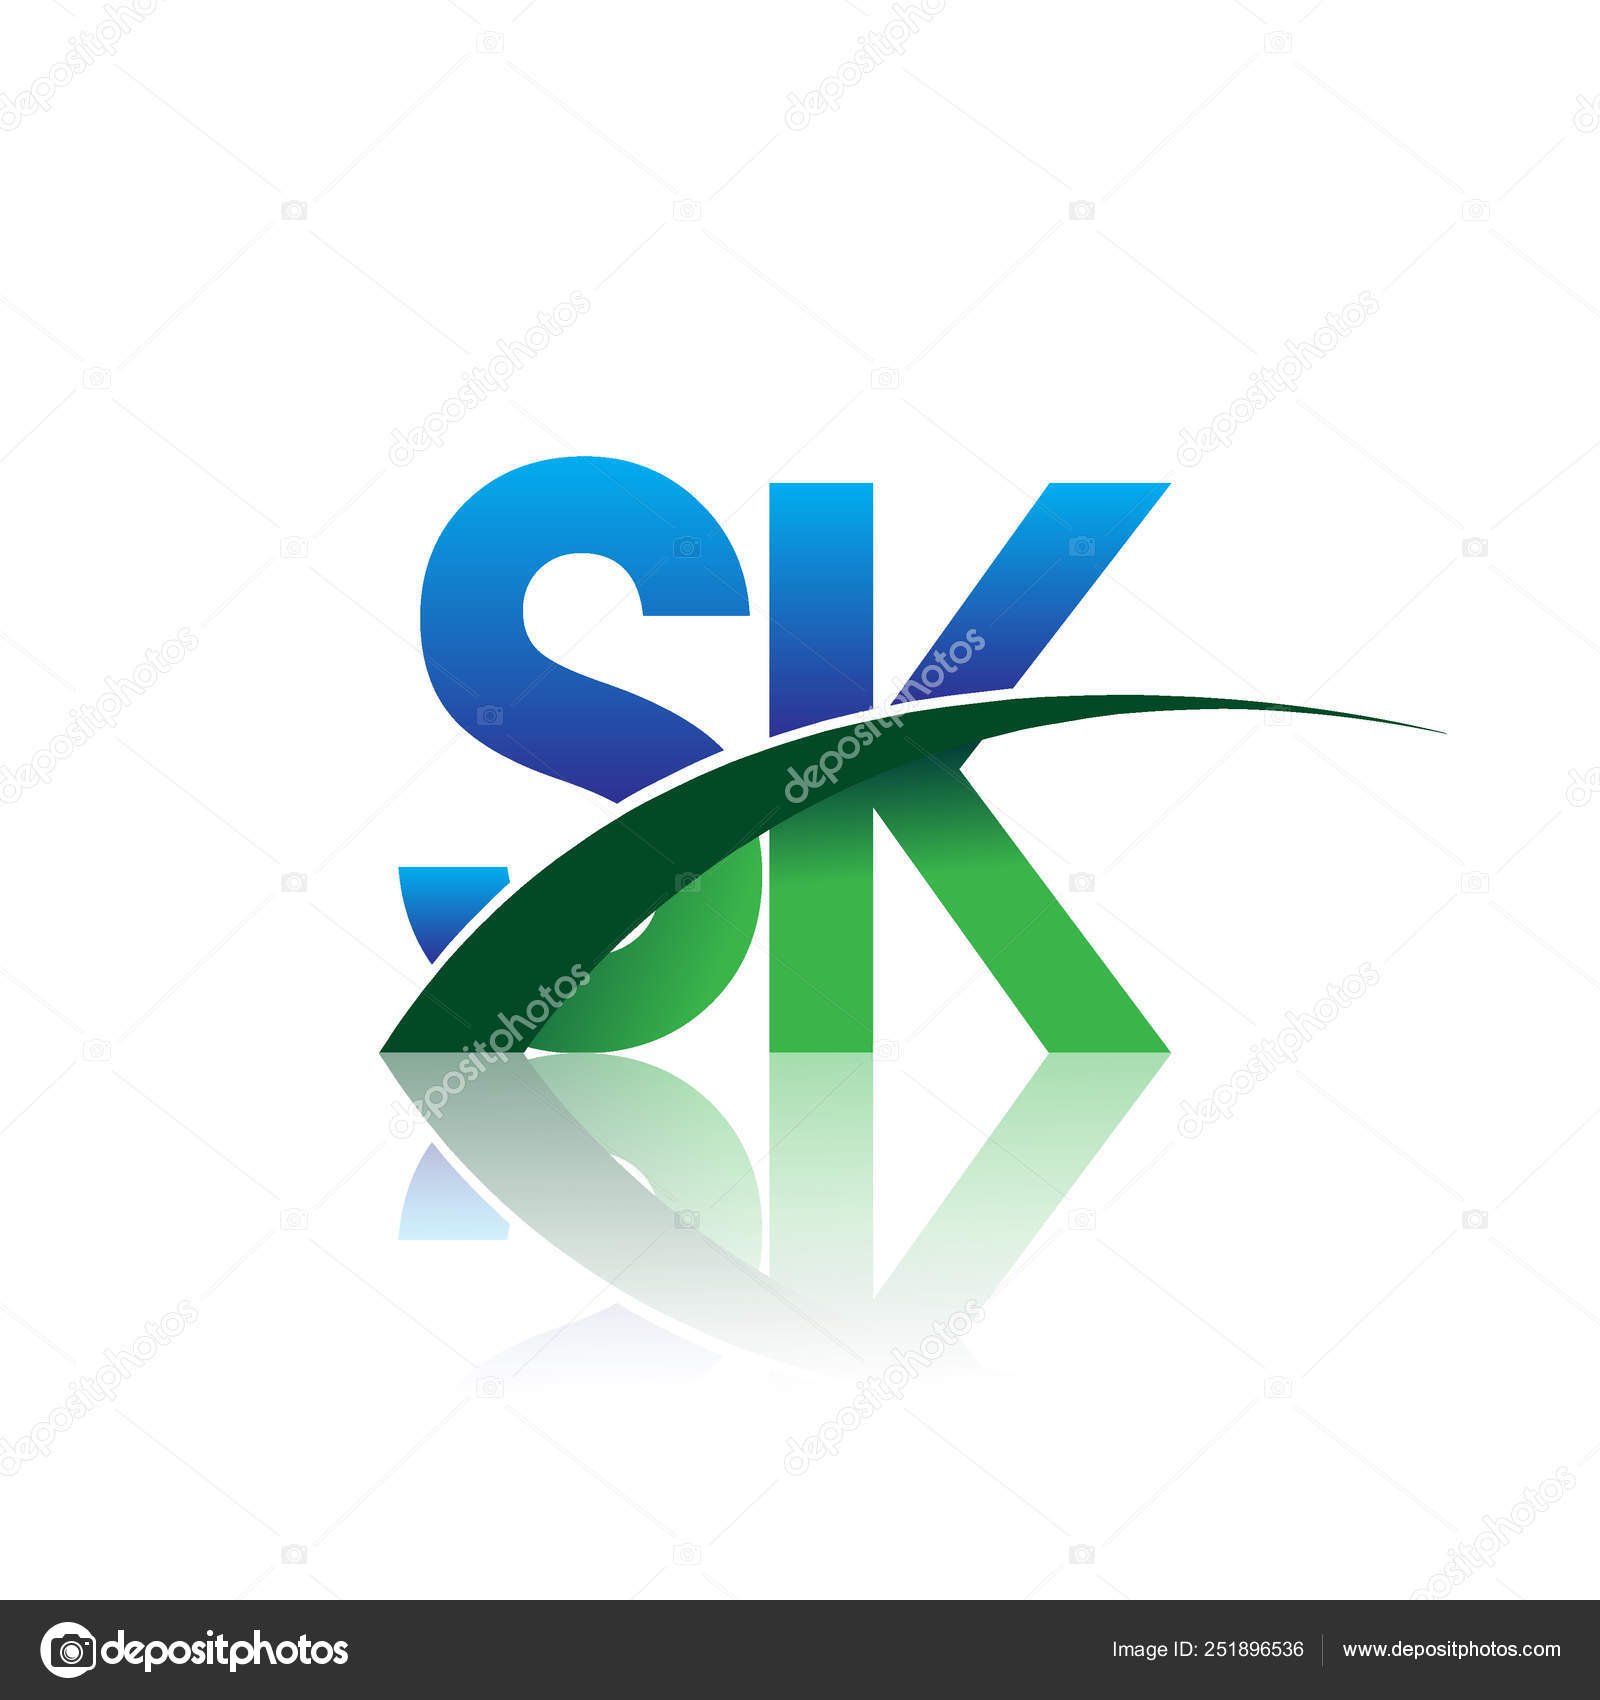 Letters sk Vector Art Stock Images | Depositphotos